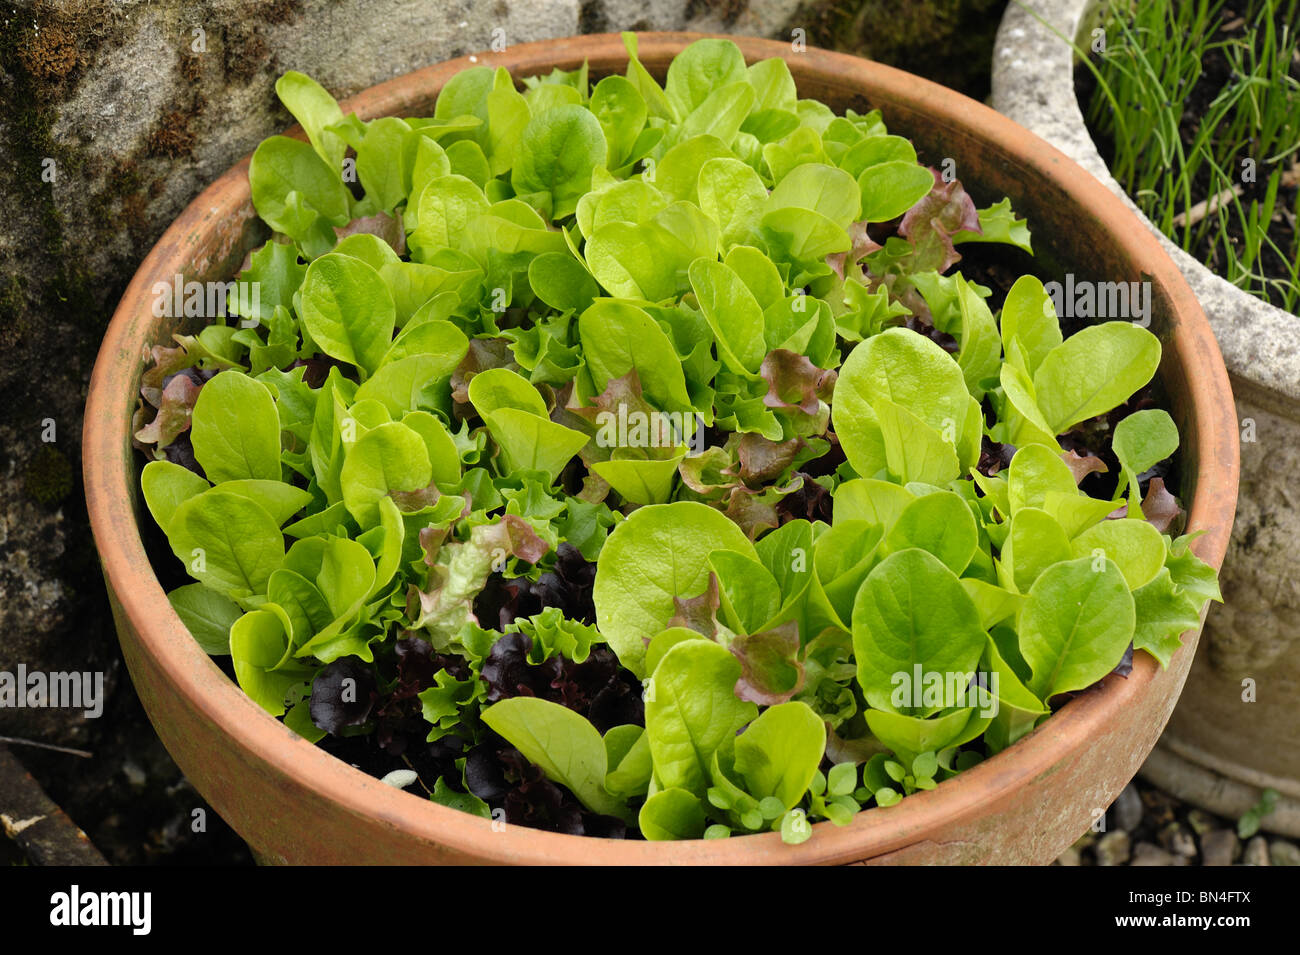 Pick and come again lettuce salad leaf vegetables growing in a terracotta pot Stock Photo